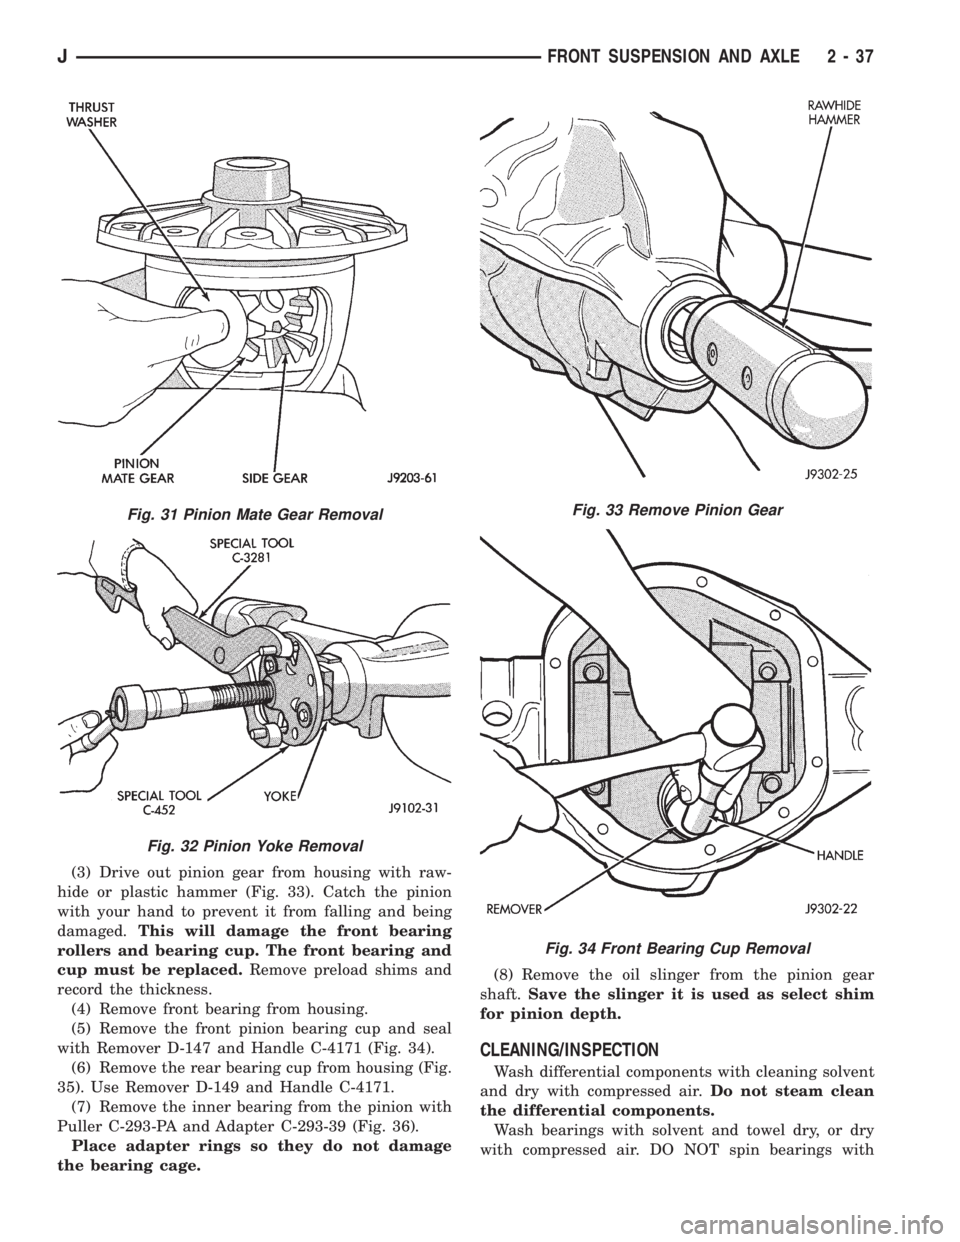 JEEP CHEROKEE 1995  Service Repair Manual (3) Drive out pinion gear from housing with raw-
hide or plastic hammer (Fig. 33). Catch the pinion
with your hand to prevent it from falling and being
damaged.This will damage the front bearing
rolle